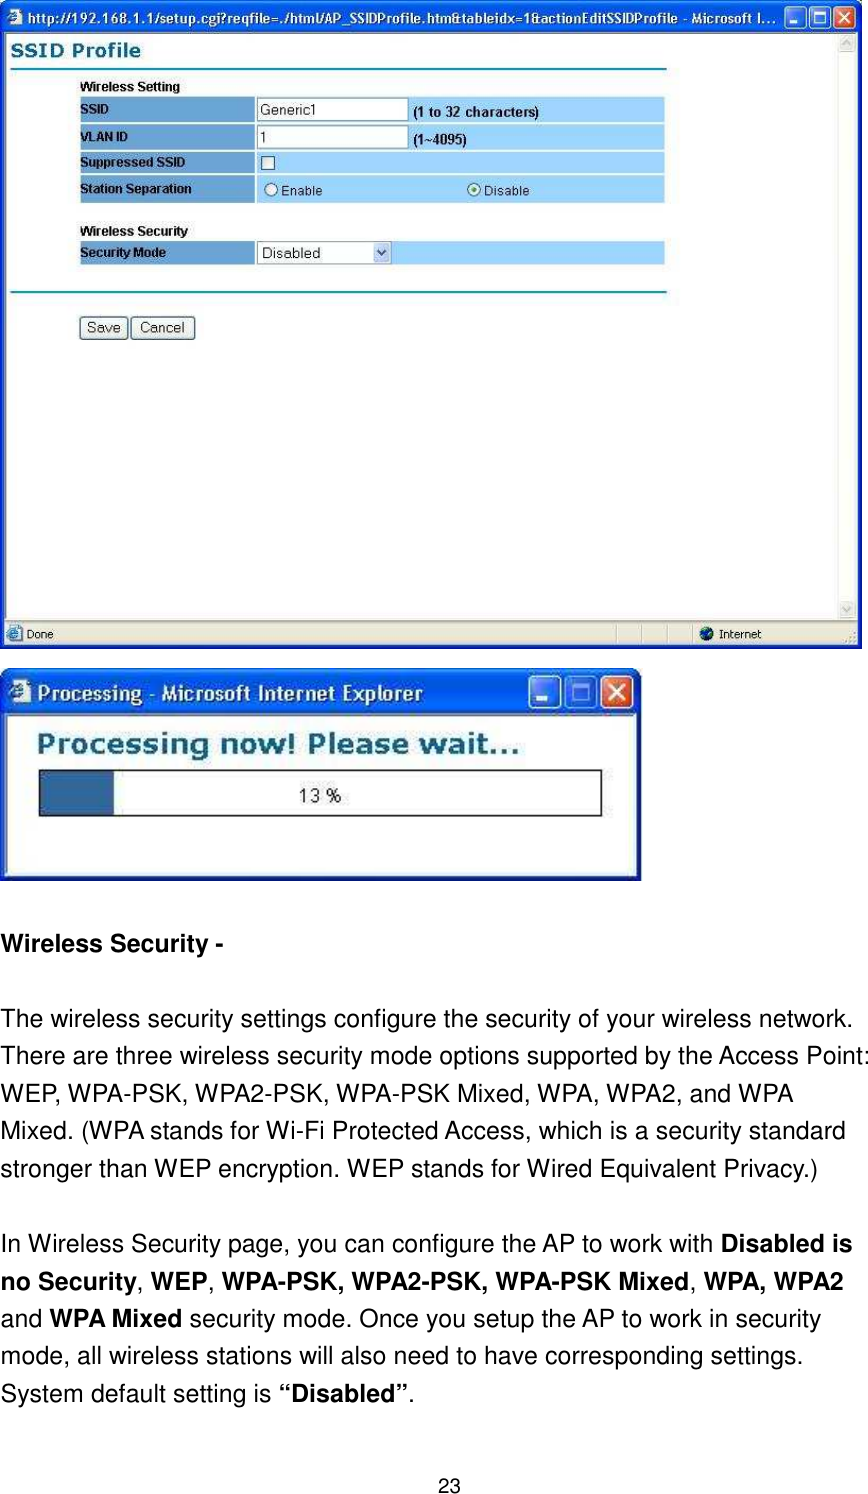  23    Wireless Security -    The wireless security settings configure the security of your wireless network. There are three wireless security mode options supported by the Access Point: WEP, WPA-PSK, WPA2-PSK, WPA-PSK Mixed, WPA, WPA2, and WPA   Mixed. (WPA stands for Wi-Fi Protected Access, which is a security standard stronger than WEP encryption. WEP stands for Wired Equivalent Privacy.)    In Wireless Security page, you can configure the AP to work with Disabled is no Security, WEP, WPA-PSK, WPA2-PSK, WPA-PSK Mixed, WPA, WPA2 and WPA Mixed security mode. Once you setup the AP to work in security mode, all wireless stations will also need to have corresponding settings. System default setting is “Disabled”.  